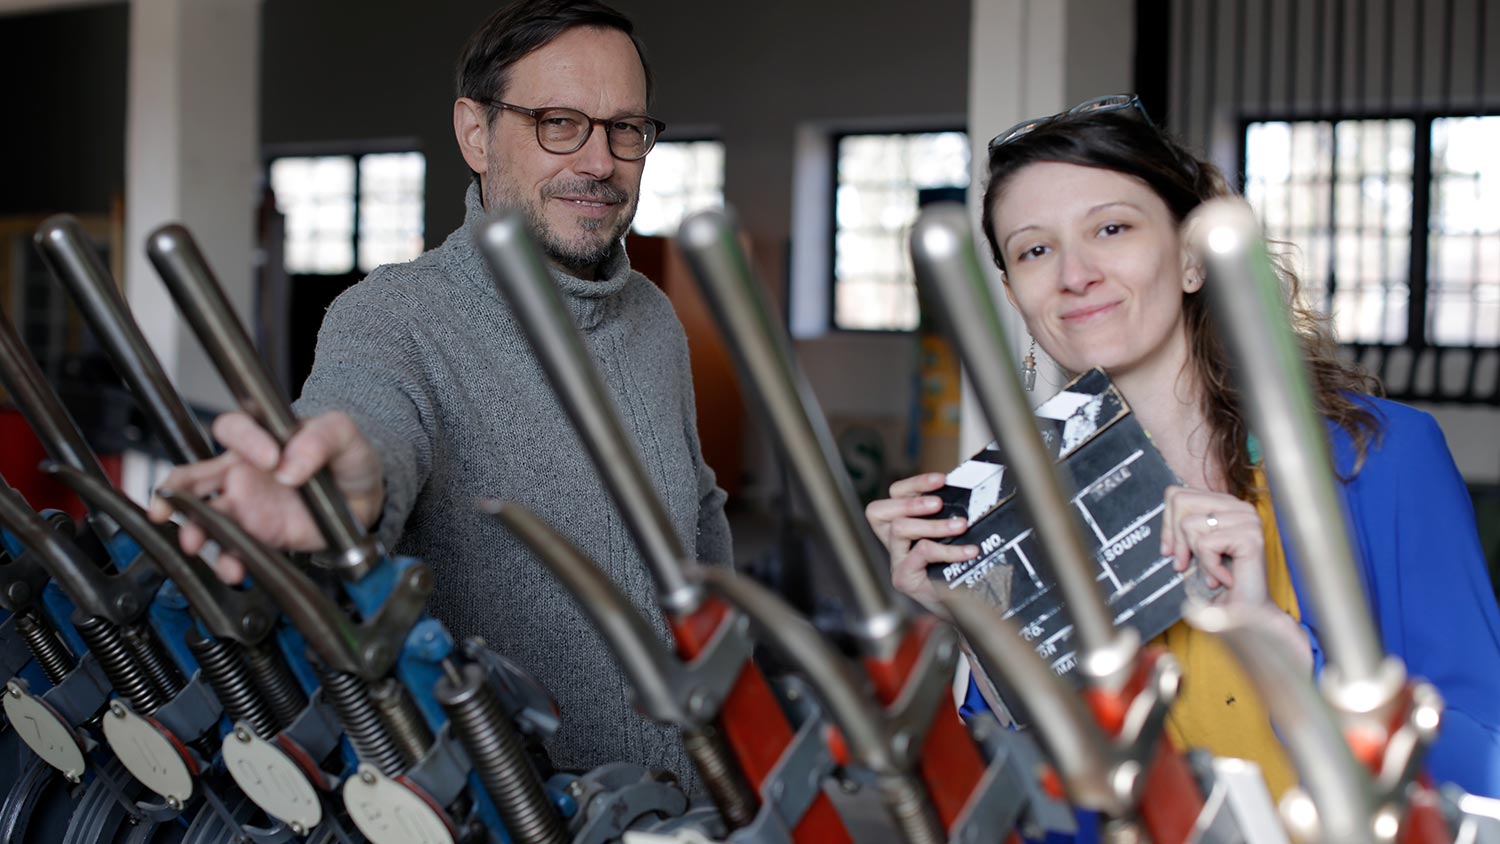 Natalia Irina Roman, Interview with Udo Dittfurth, director of S-Bahn Museum, in front of historical levers of an interlocking tower, Berlin (2019). Photographer: Dave Lojek